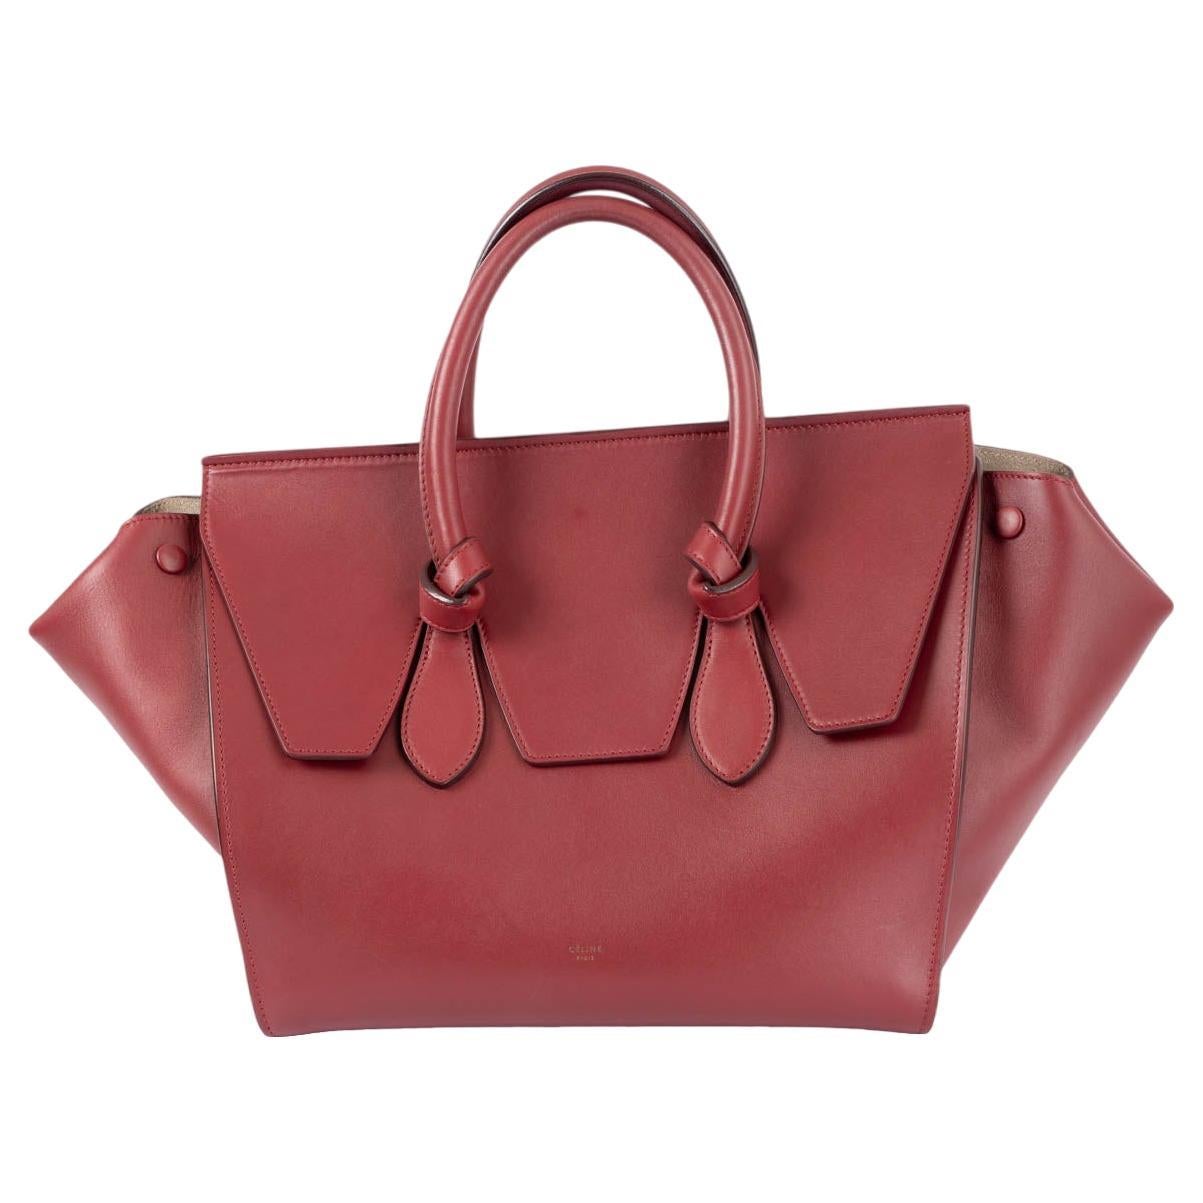 CELINE burgundy leather SMALL TIE Tote Bag For Sale